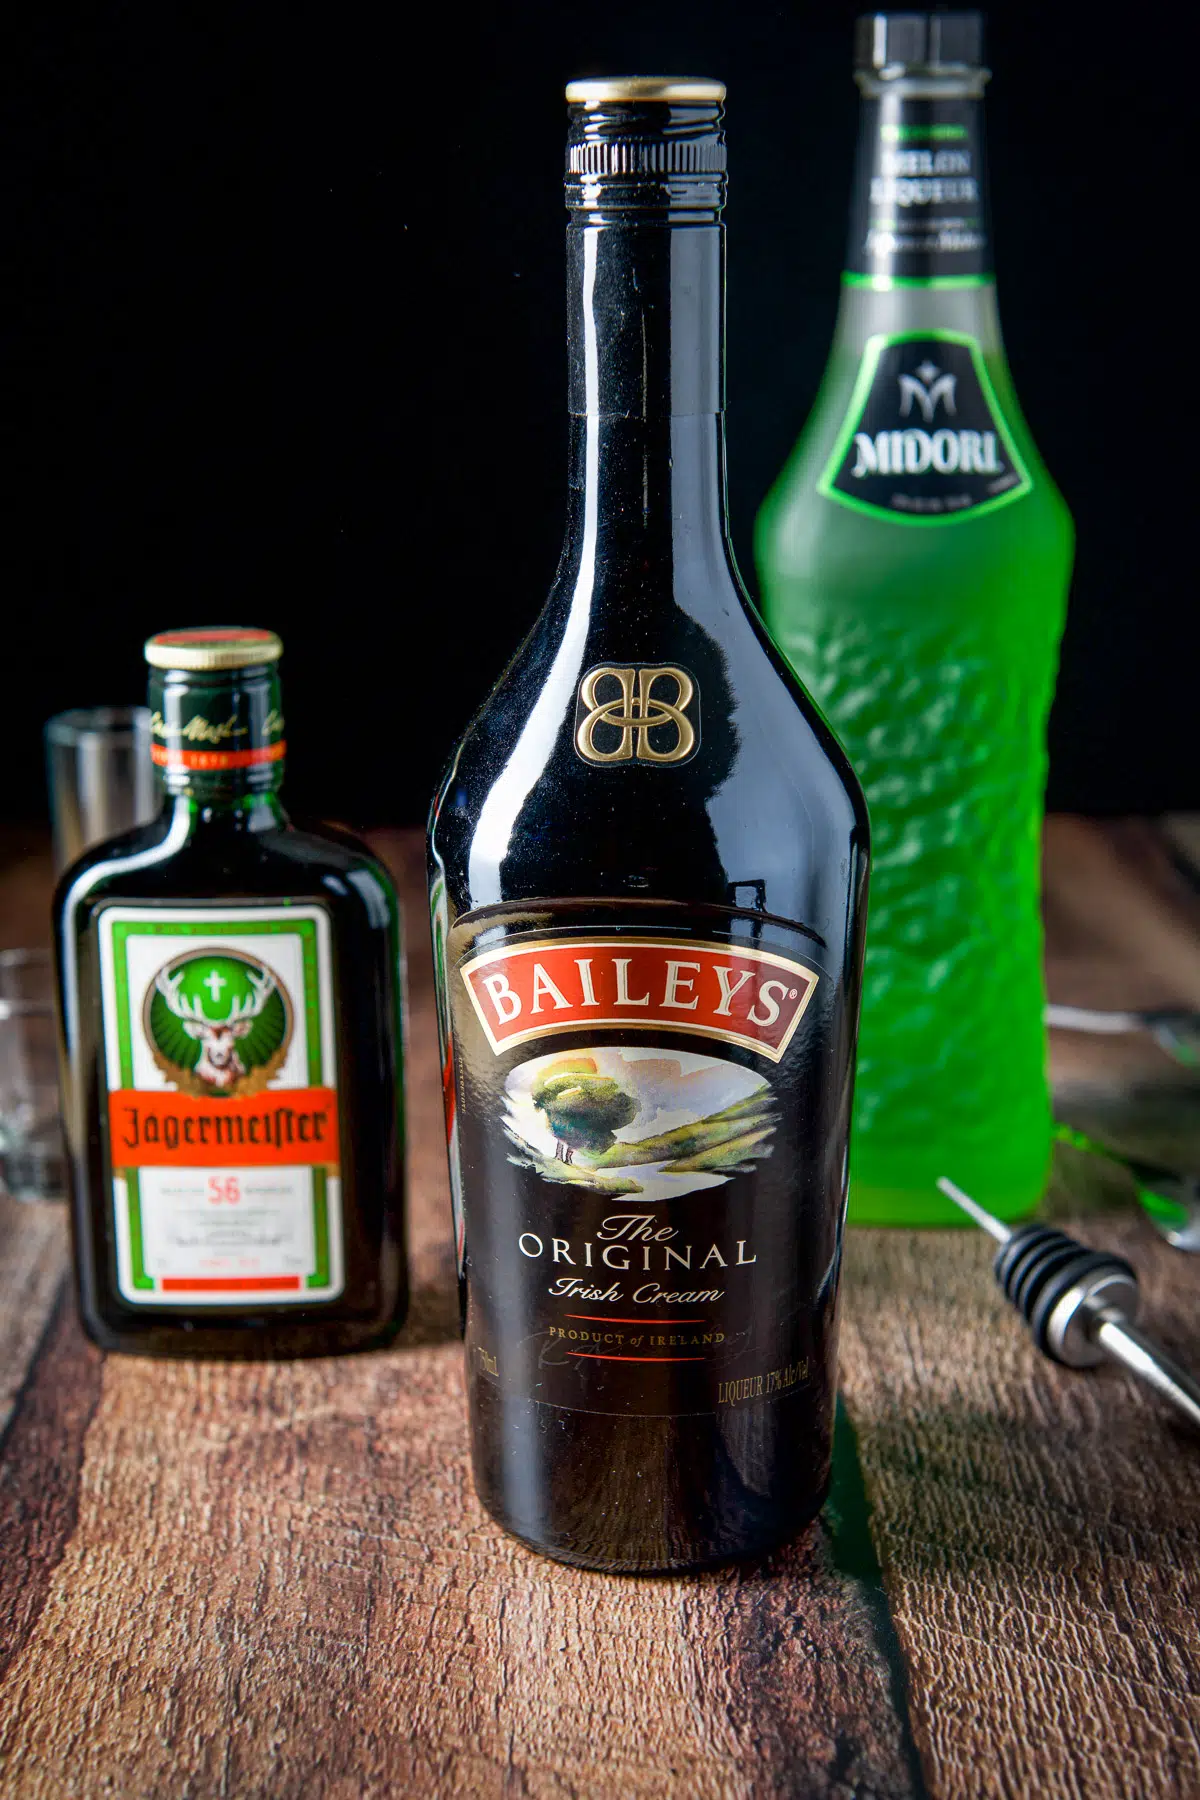 Baileys, Midori and Jagermeister on a wooden table